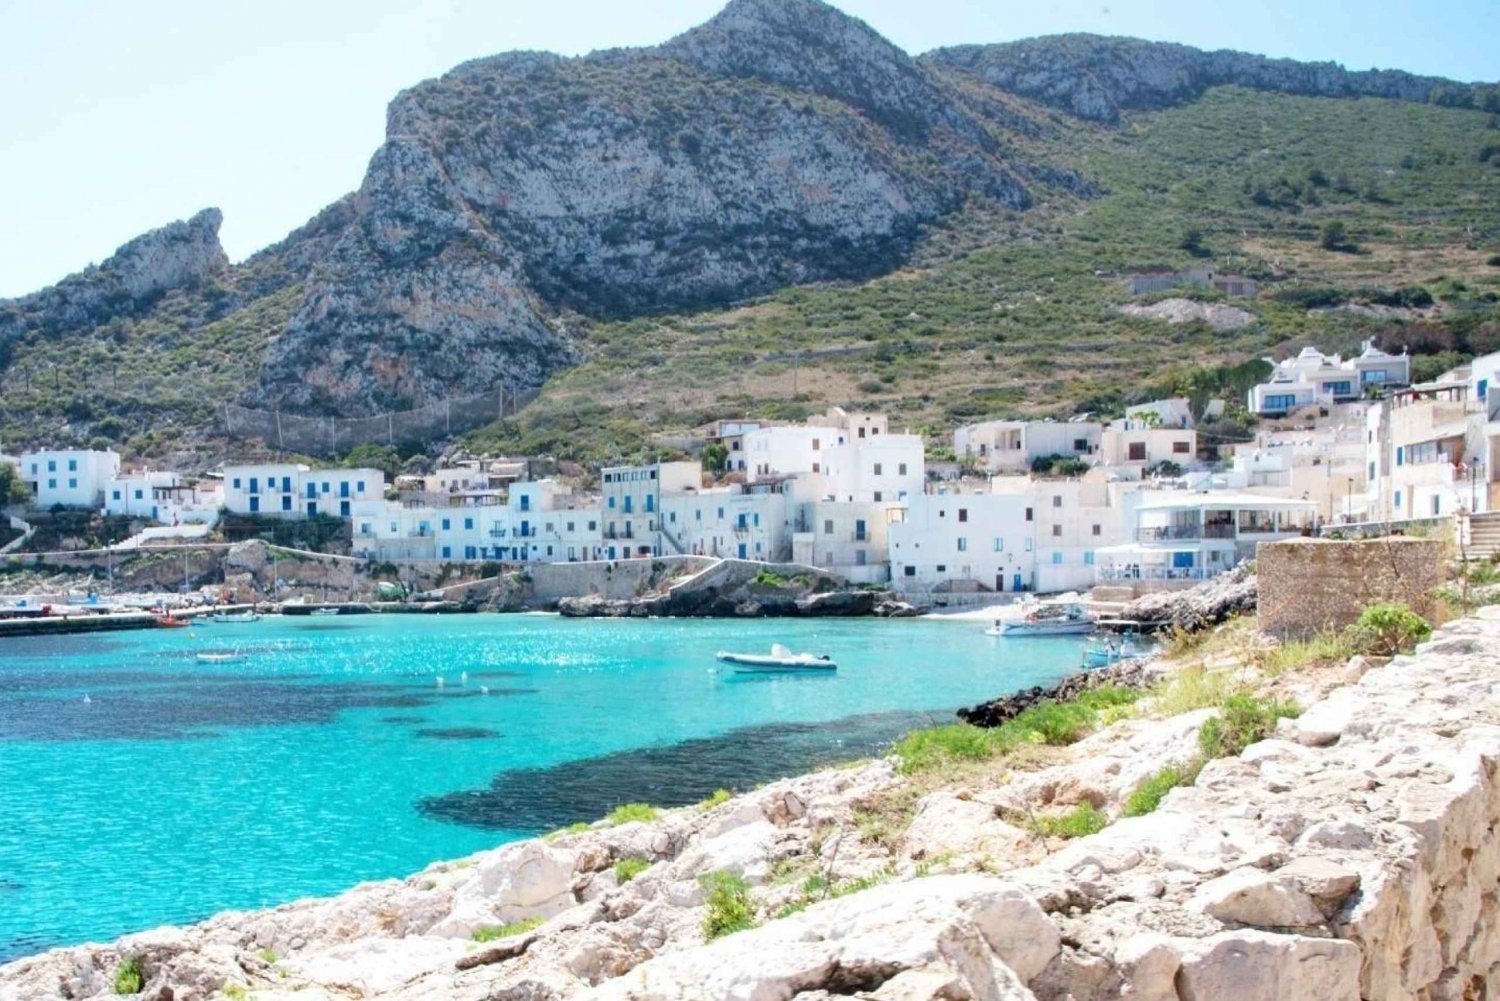 Favignana and Levanzo excursion by dinghy from Marsala